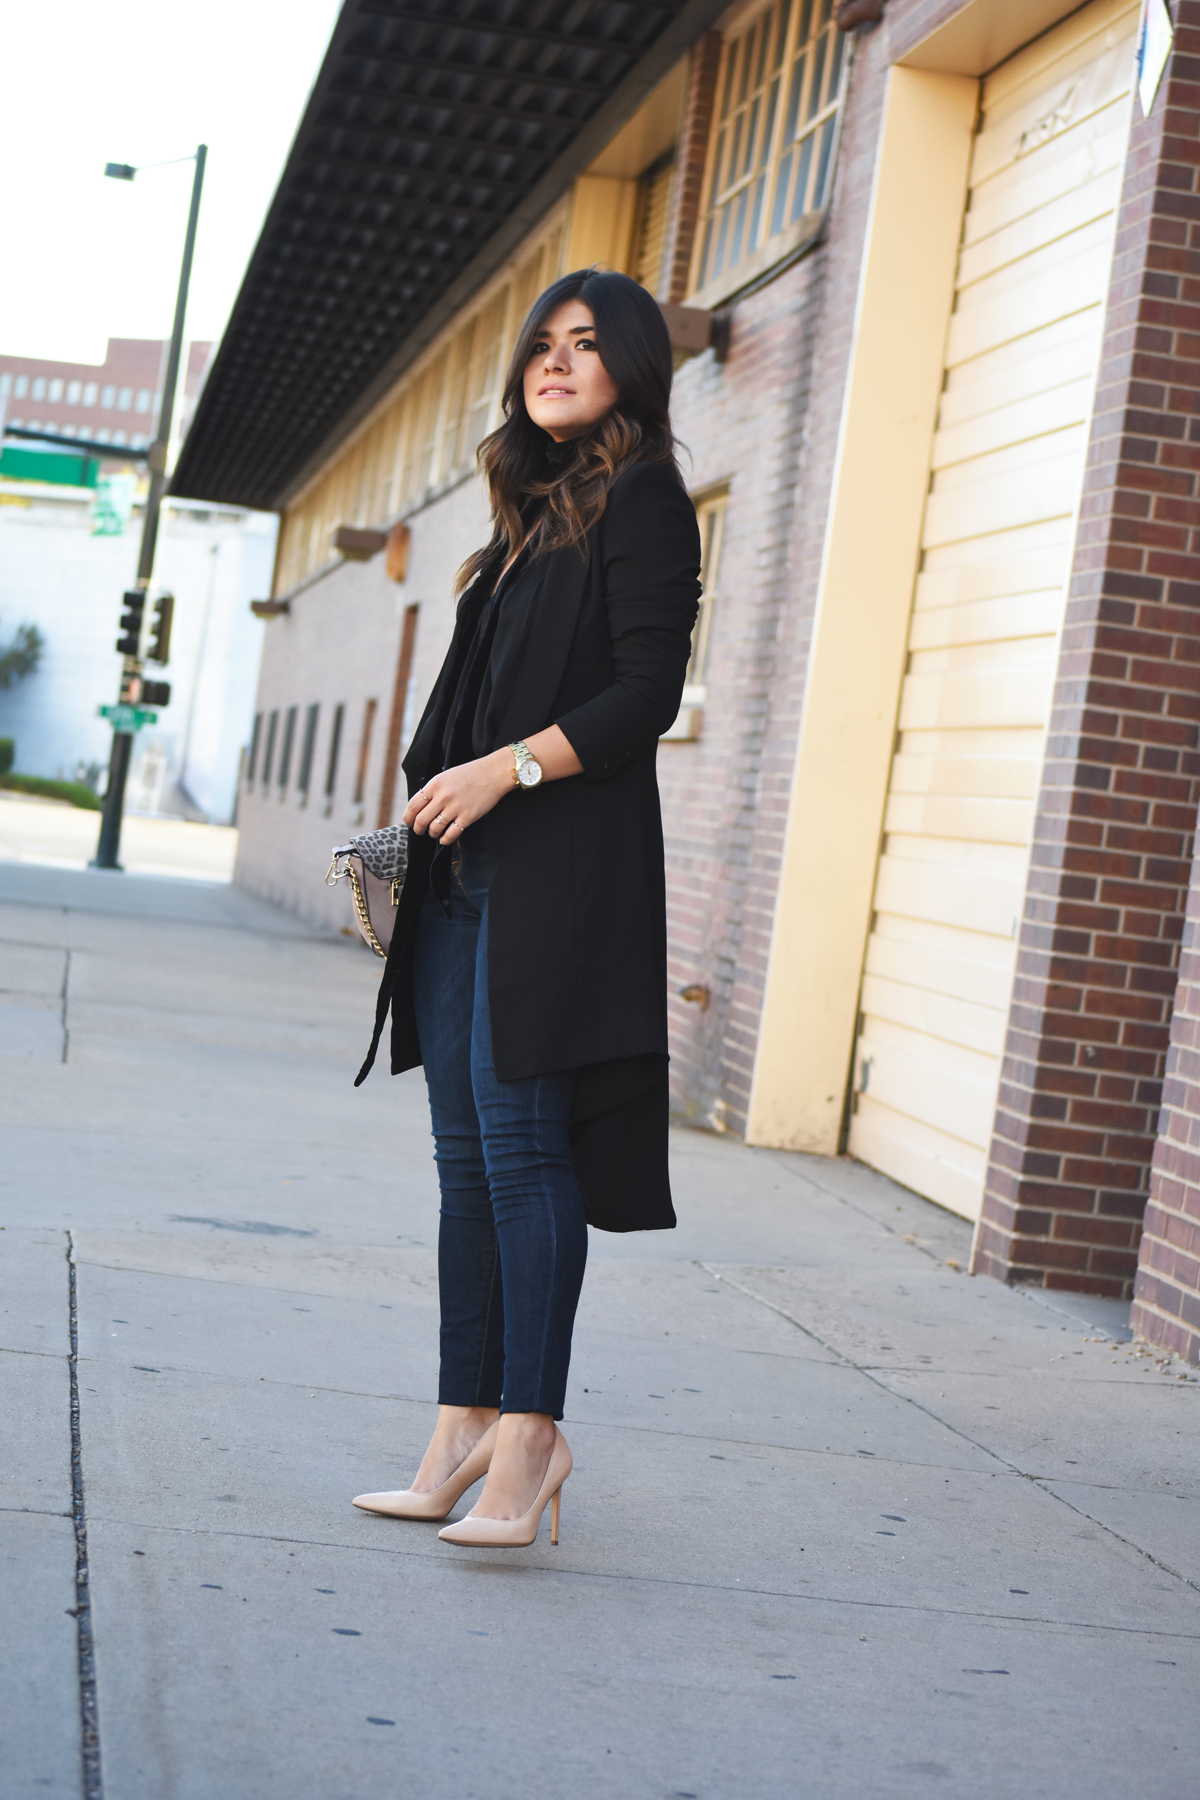 HOW TO BUILD A TIMELESS WARDROBE | CHIC TALK